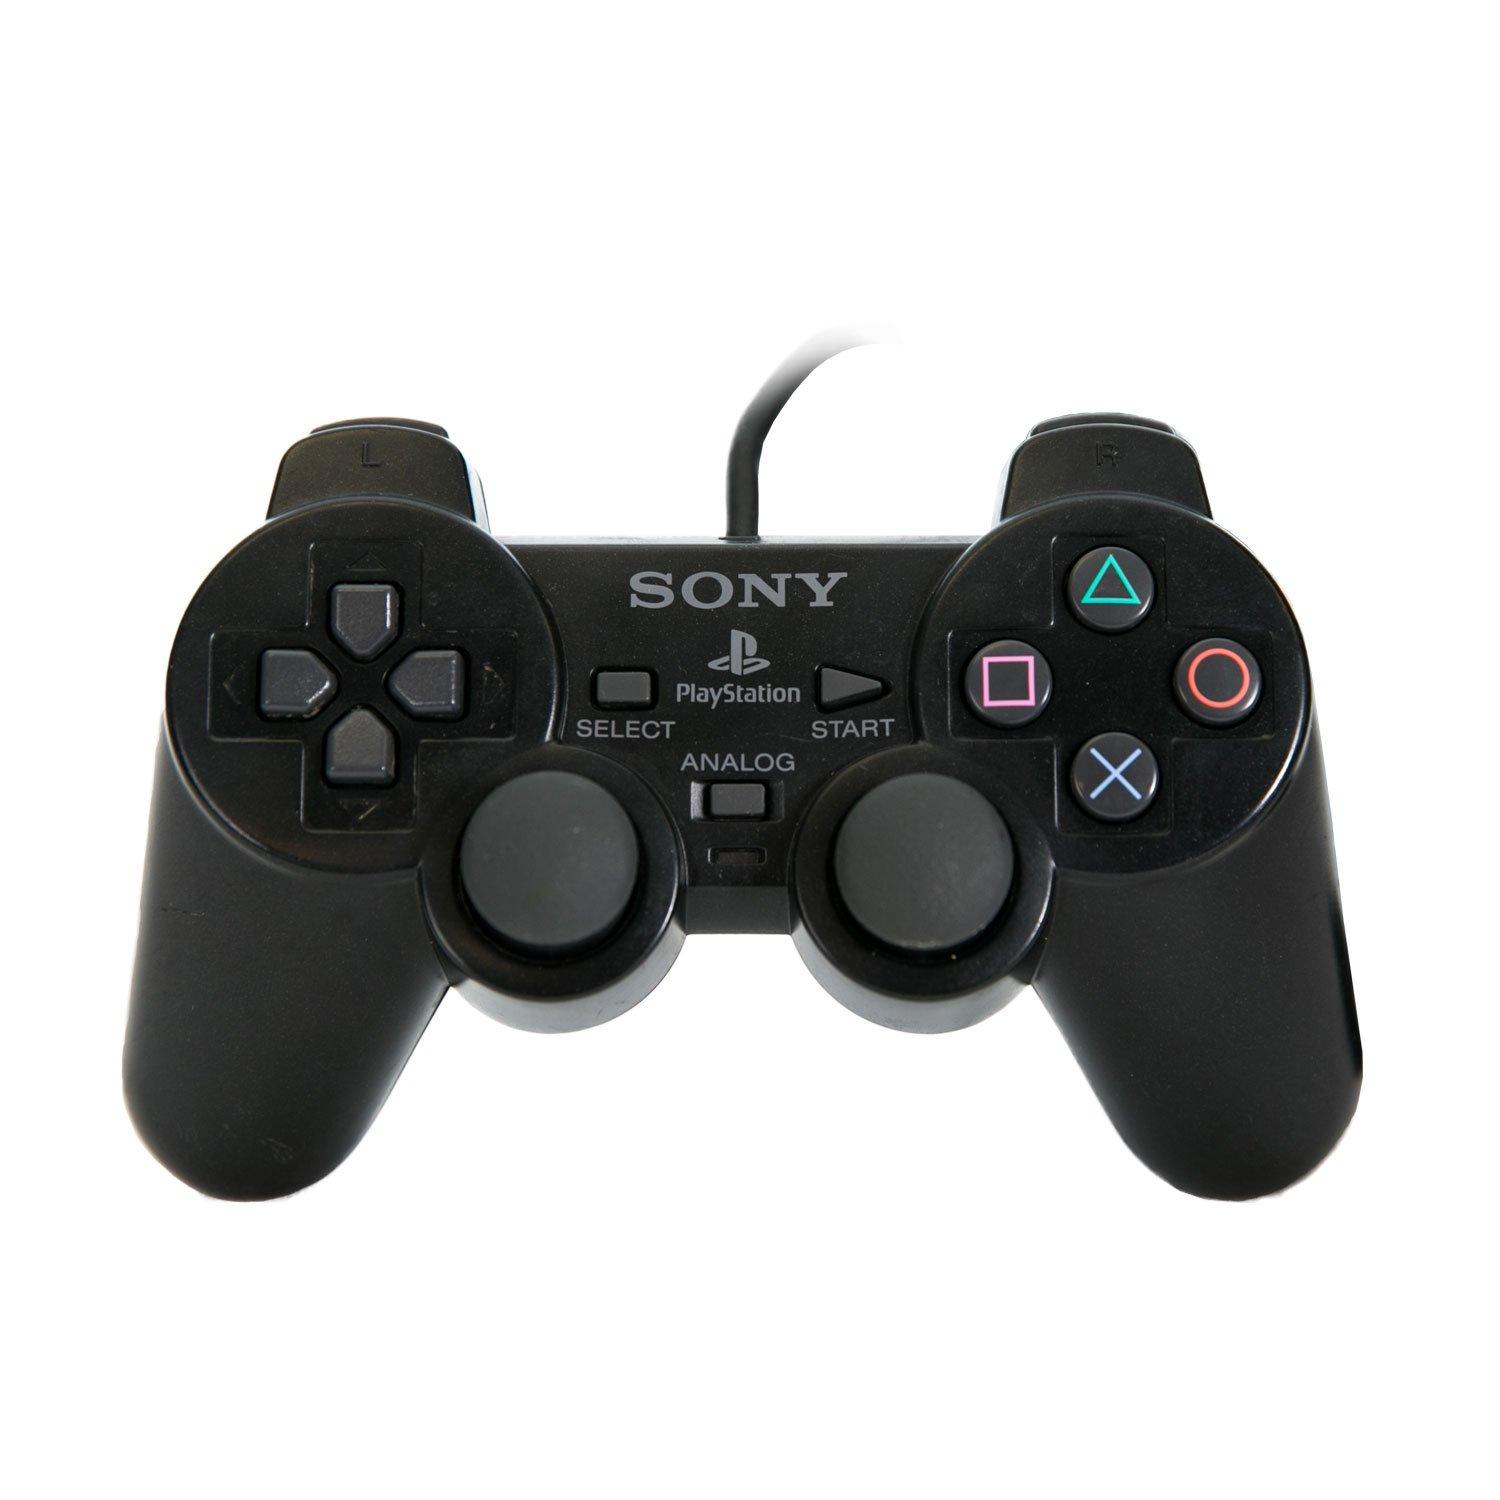 sony playstation 2 accessories